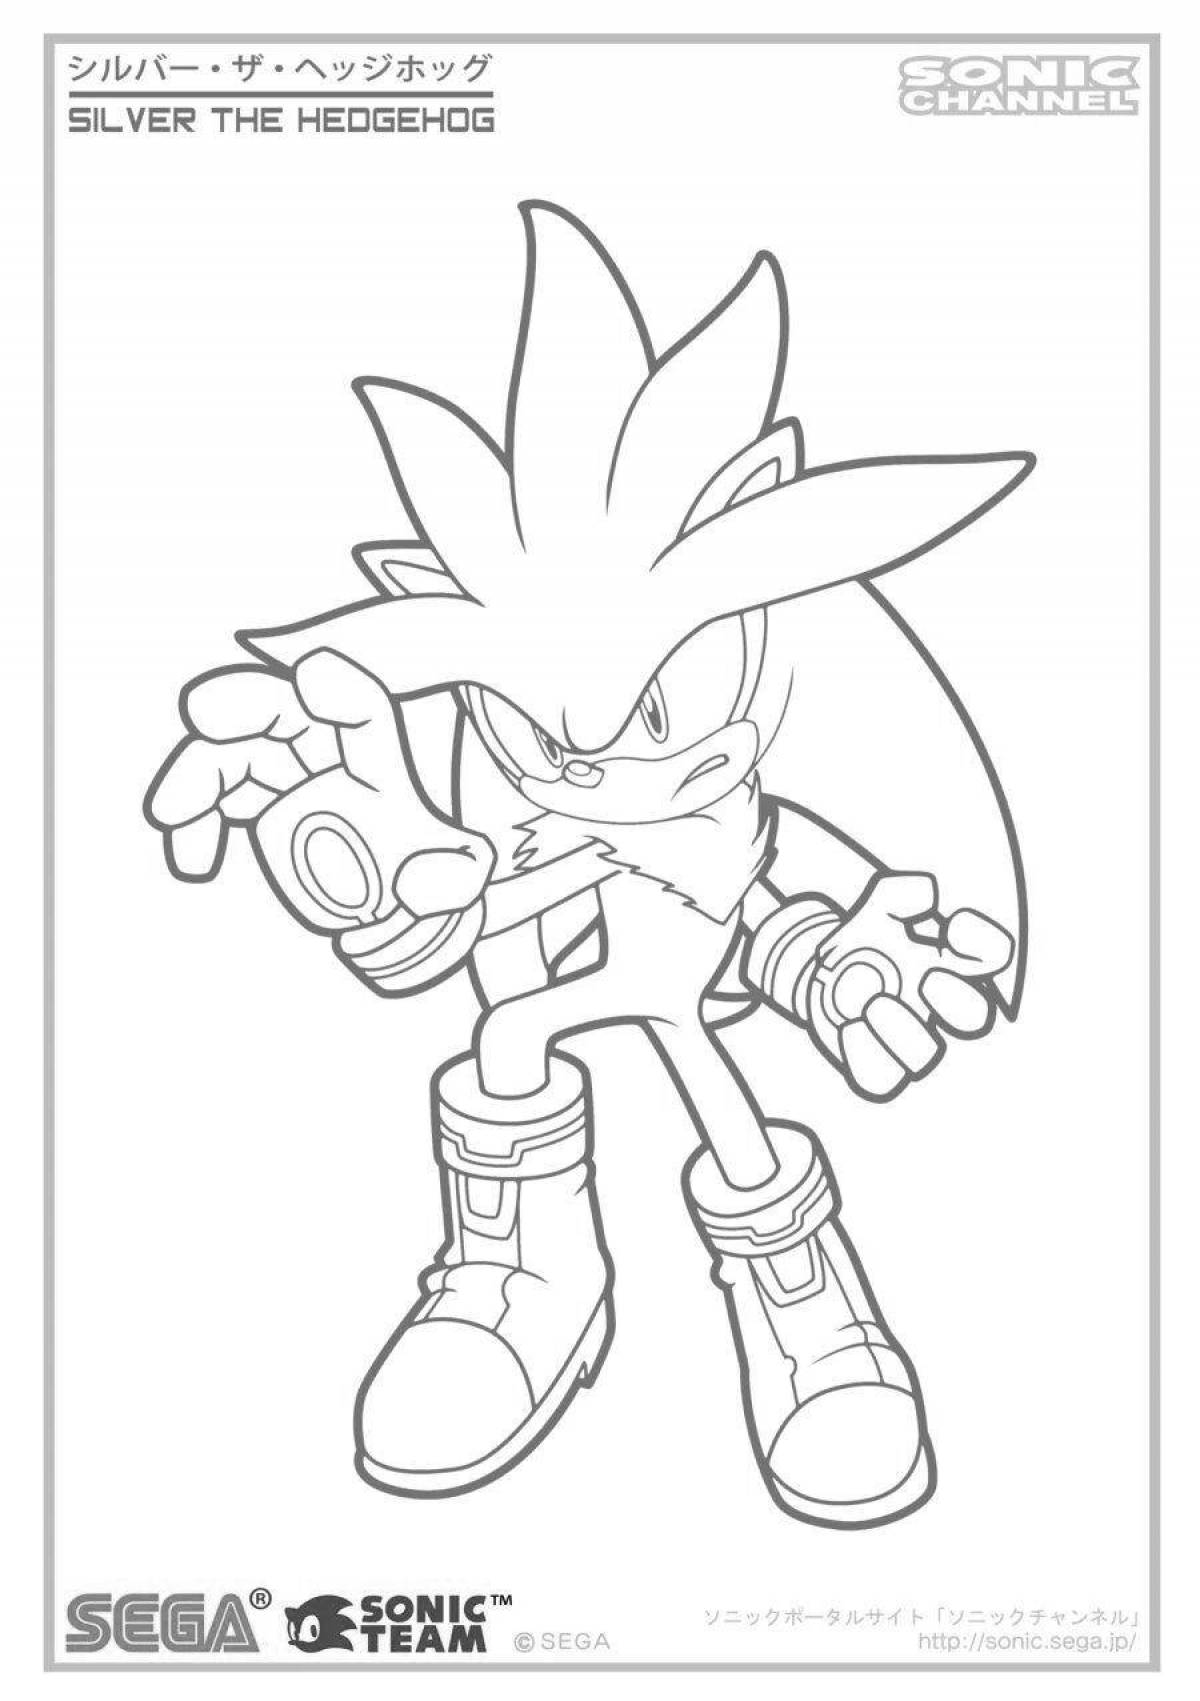 Sonic team witty coloring book